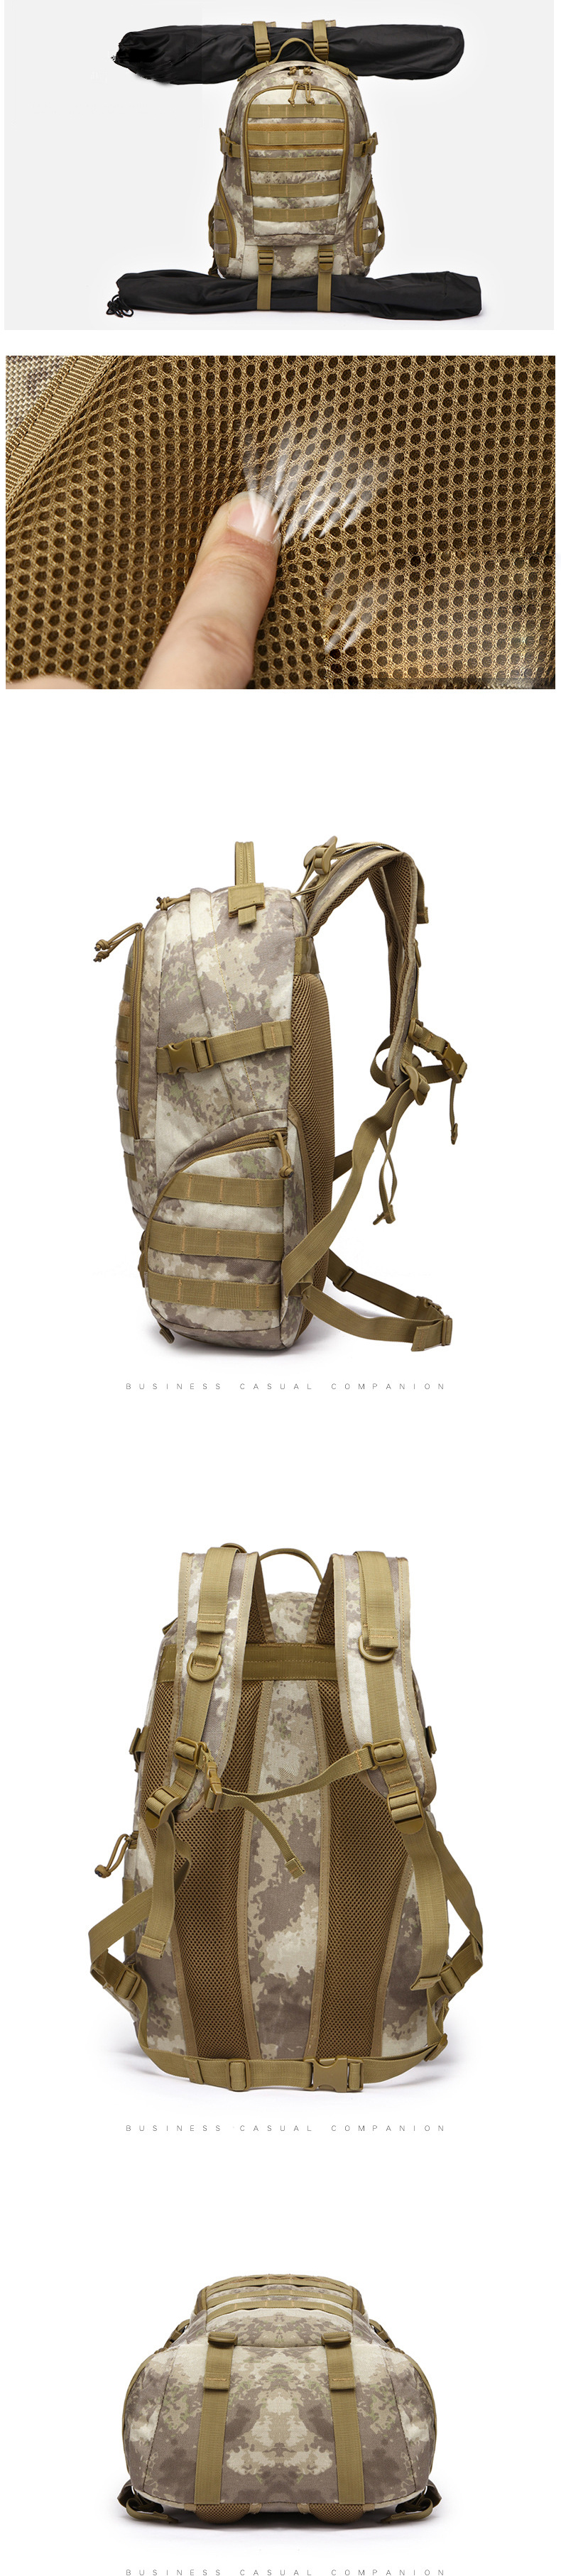 New Outdoor Mountaineering Backpack Professional Large Capacity Camouflage Mountaineering Bag